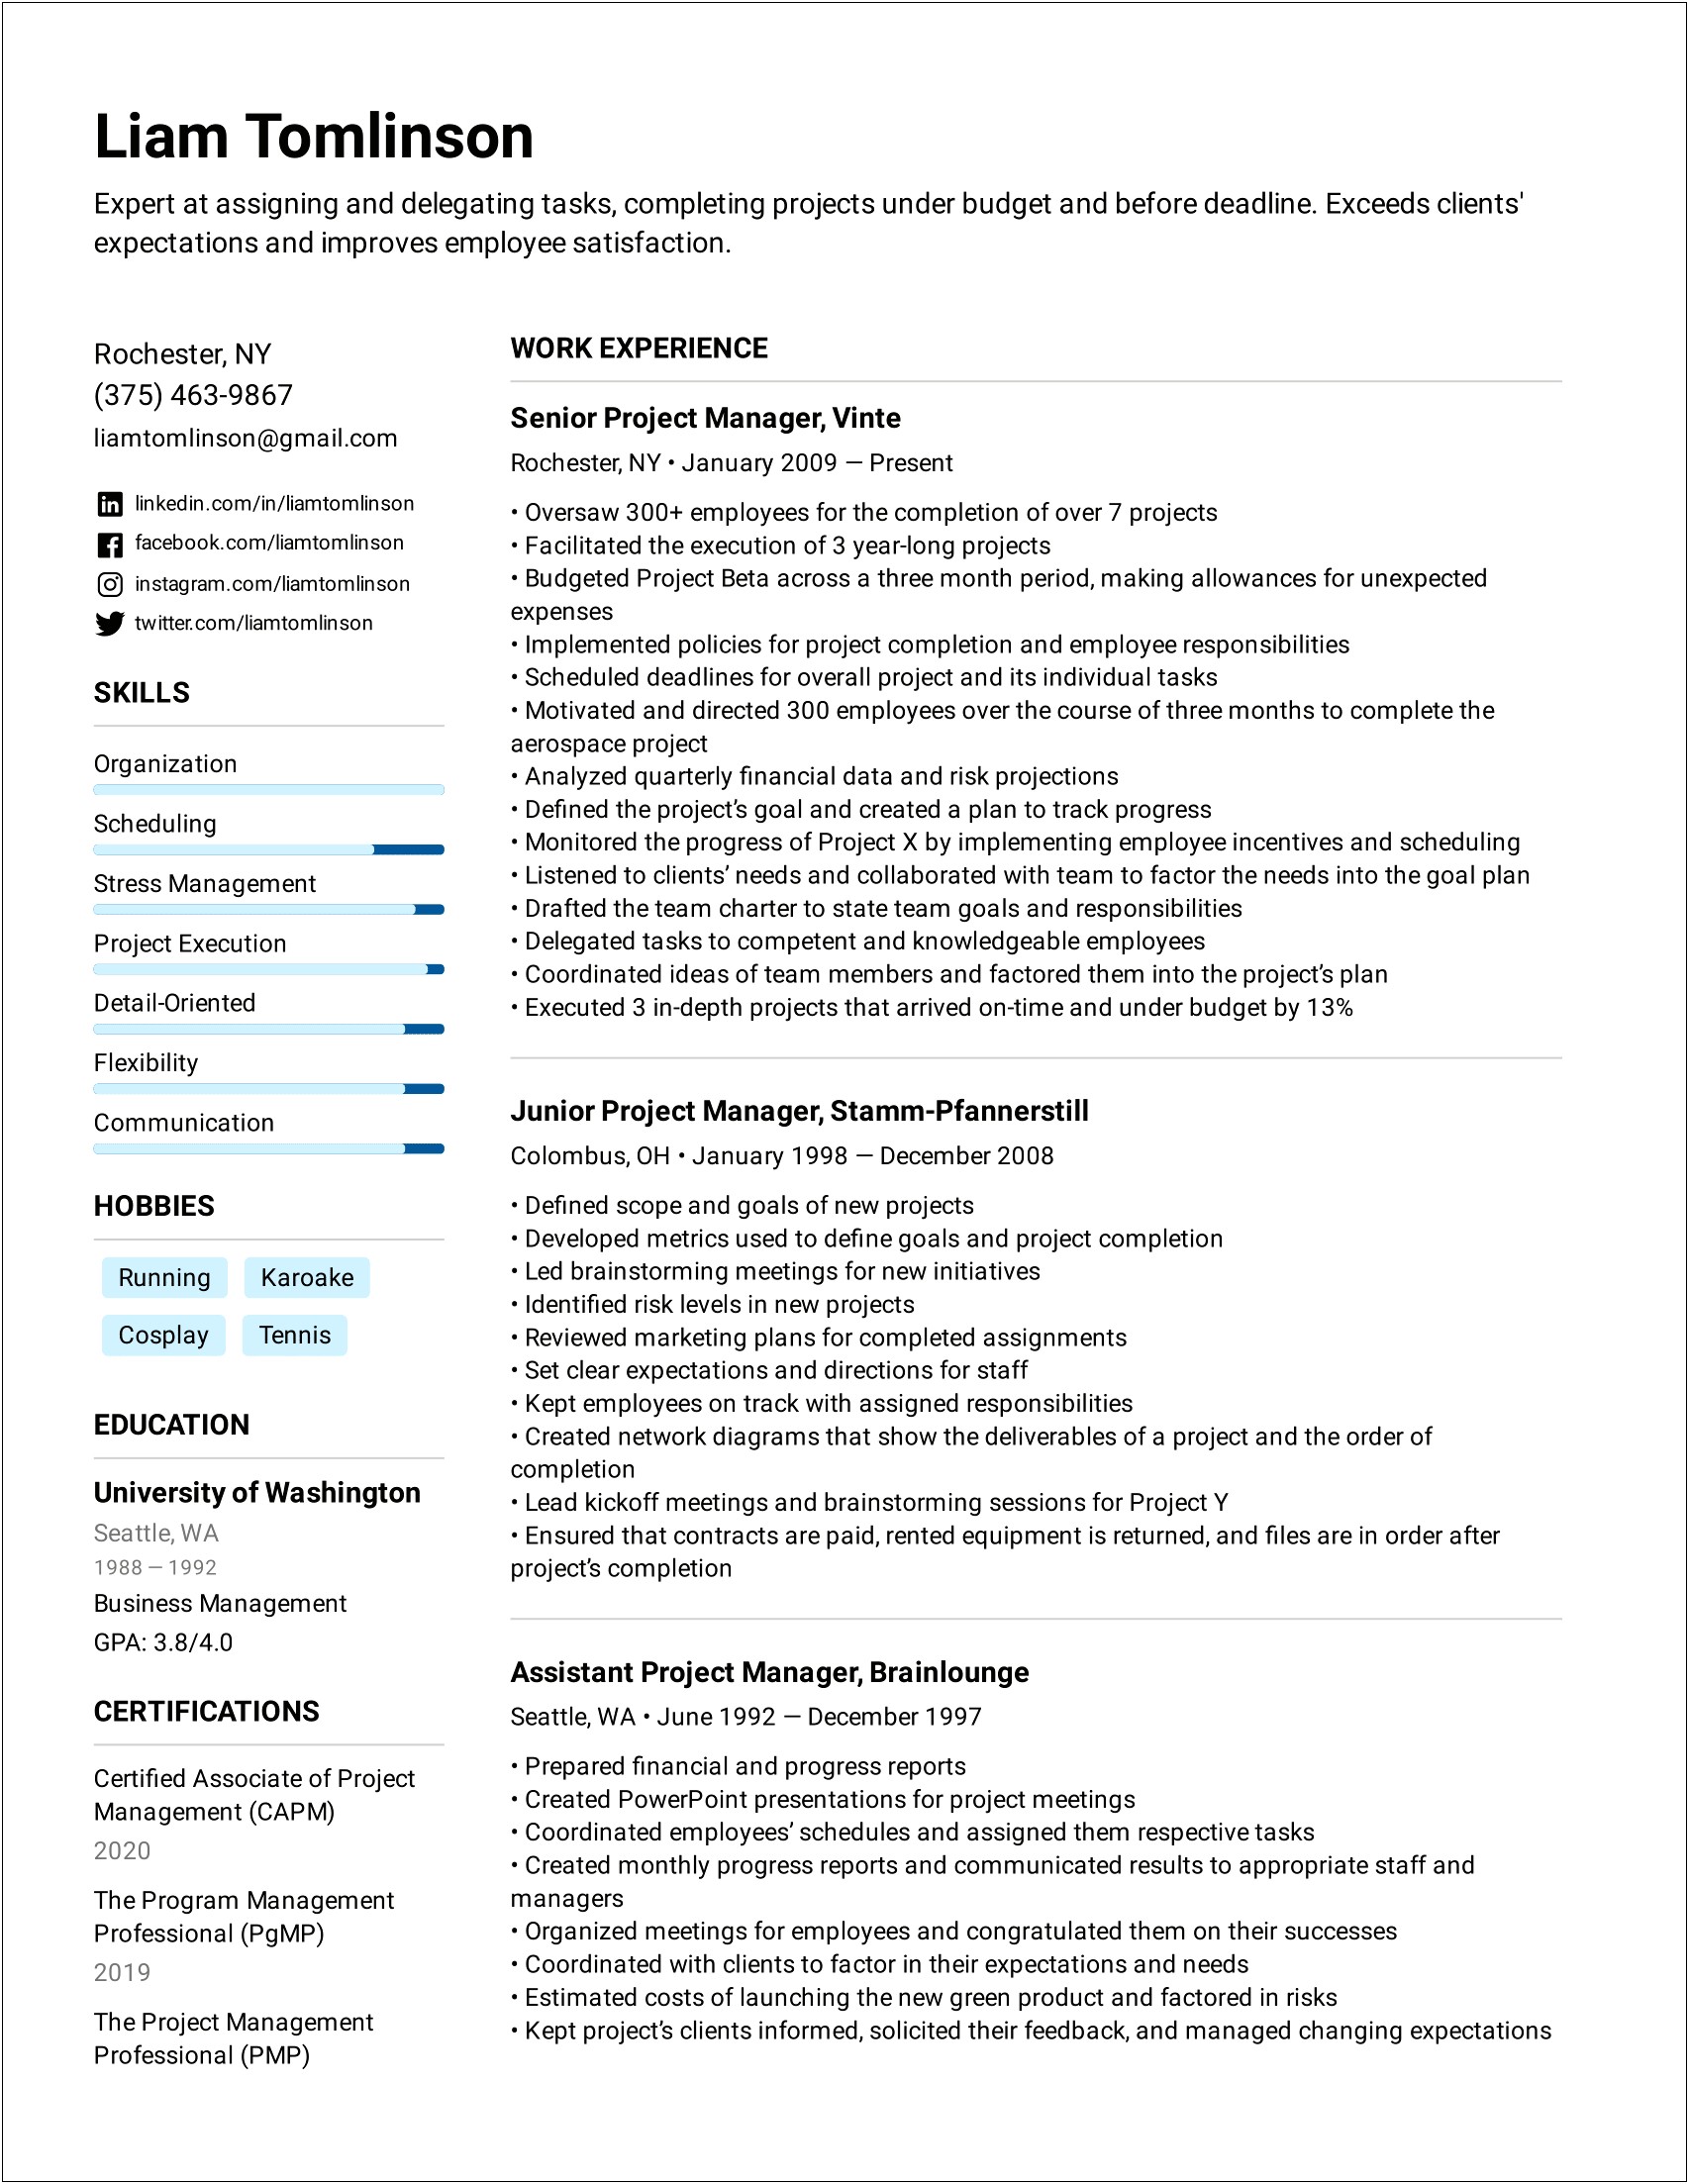 Senior Technical Project Manager Resume Sample